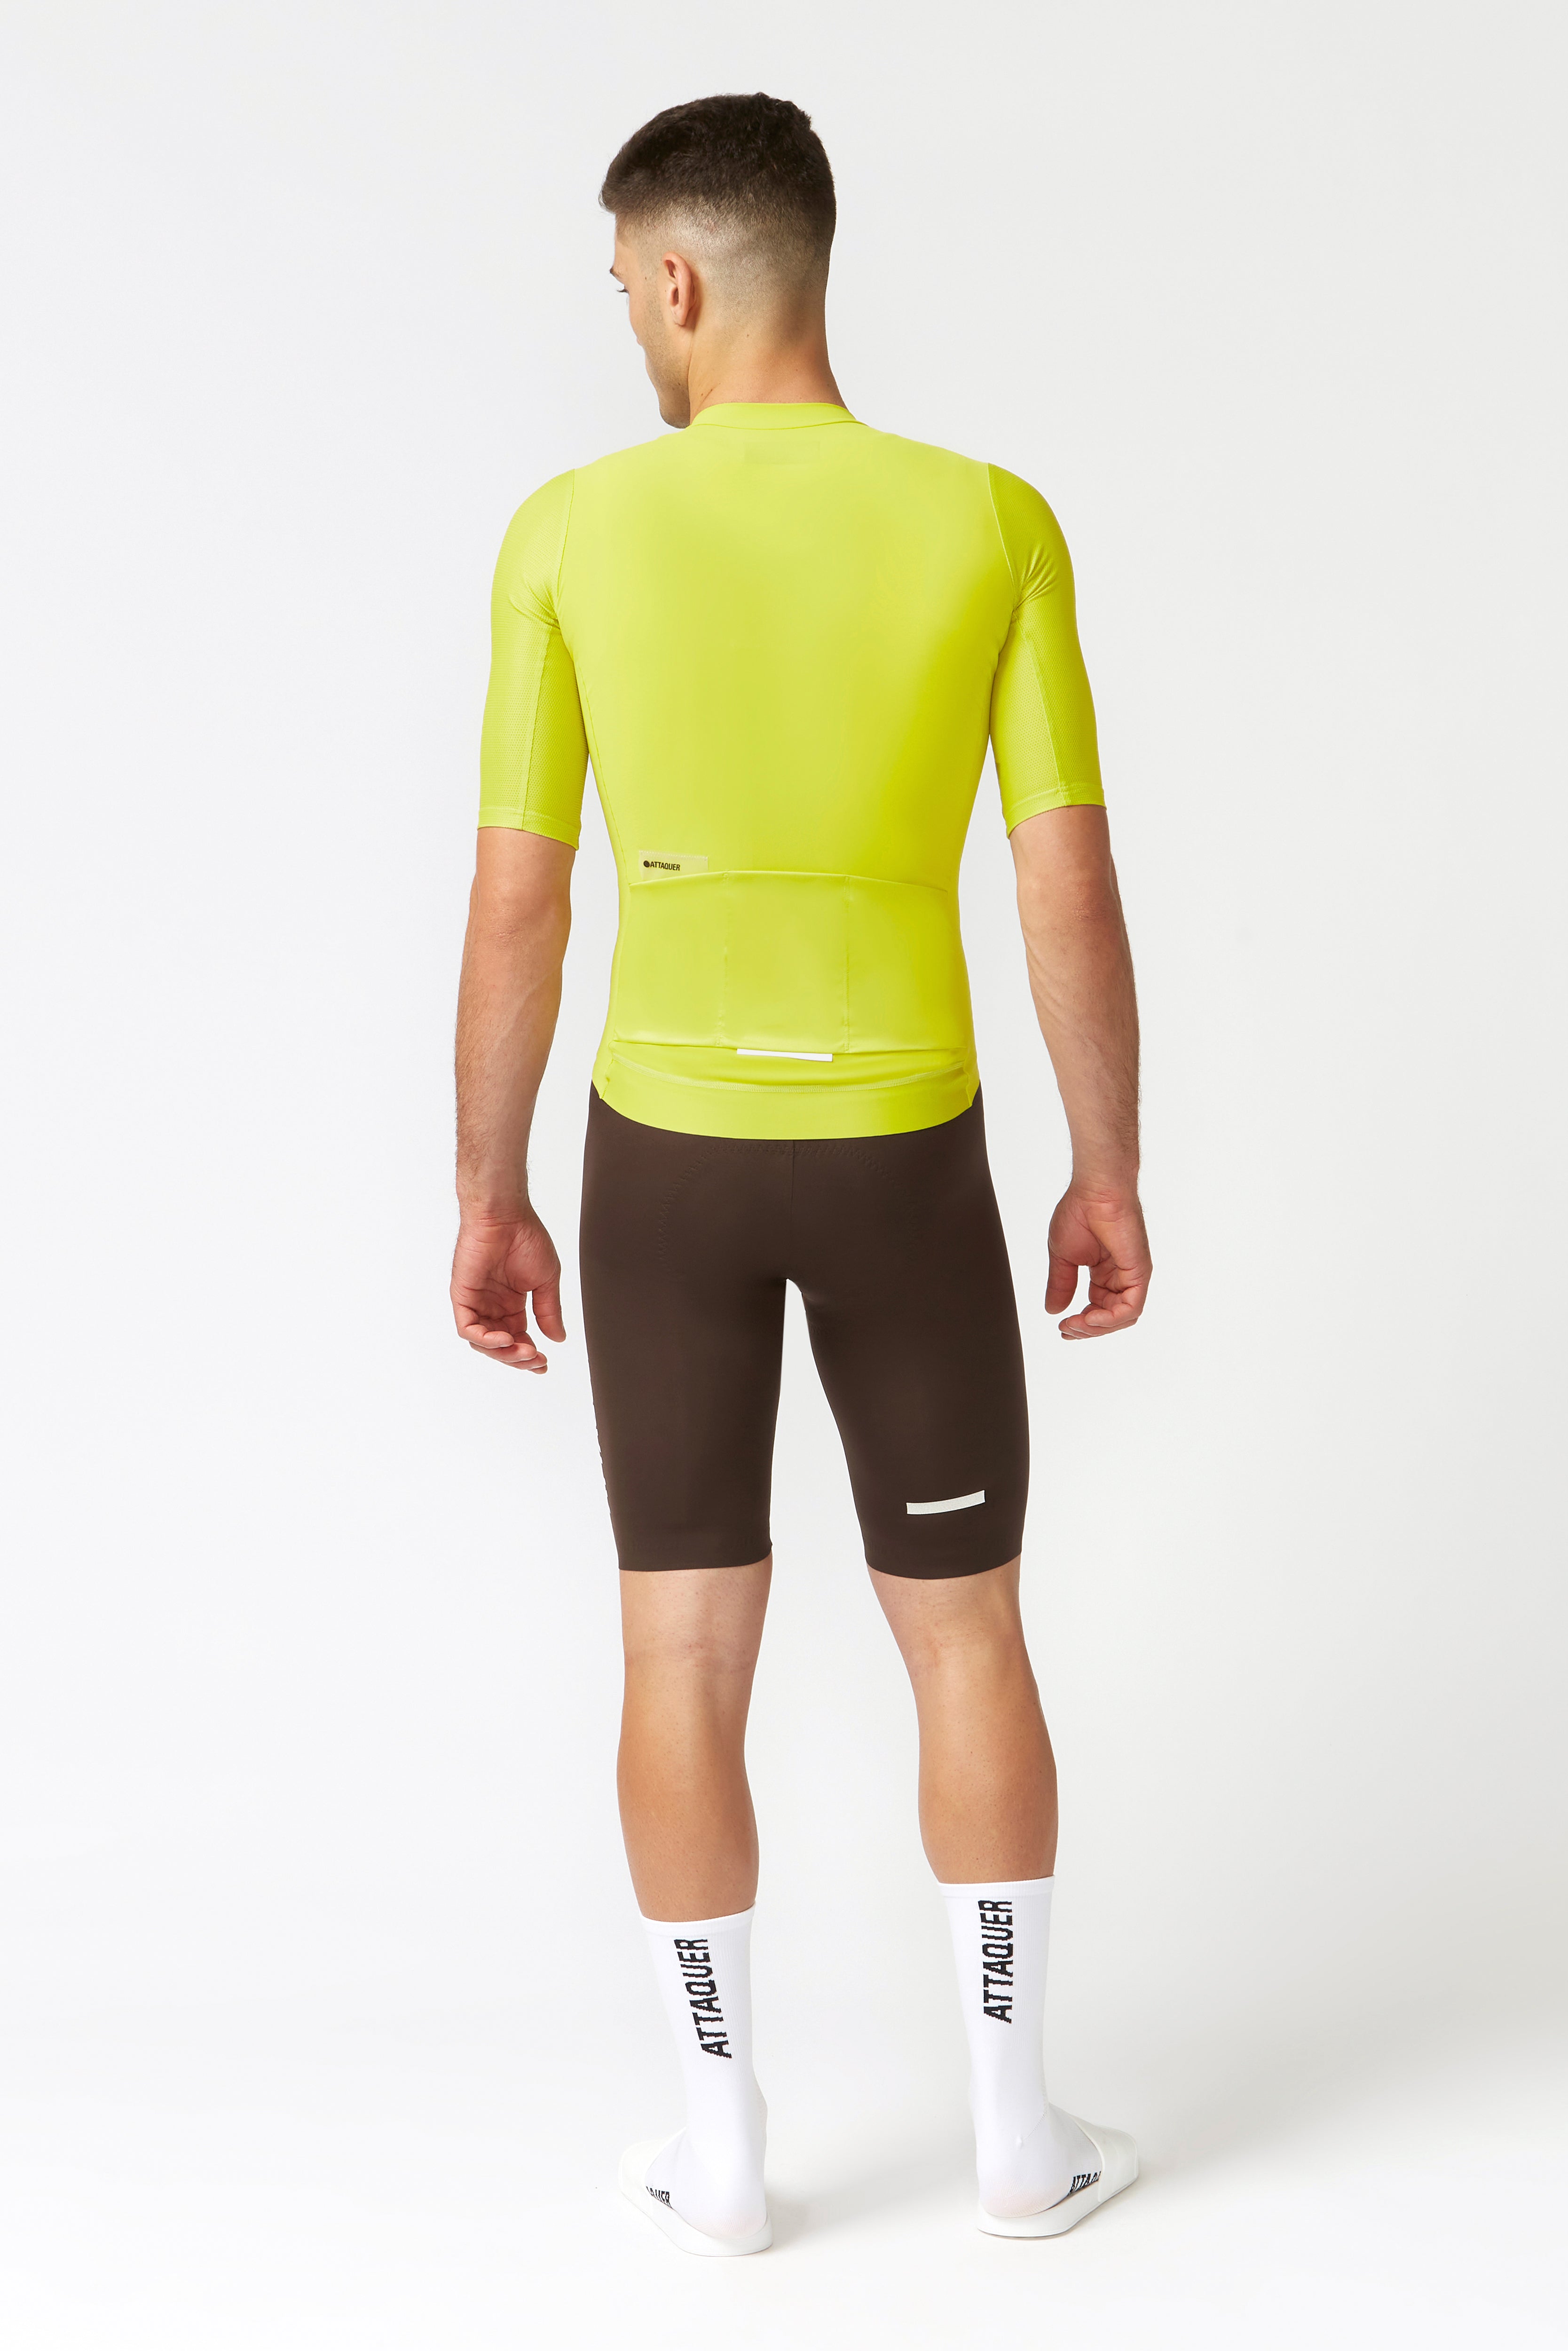 Race Jersey 2.0 Lime | Attaquer